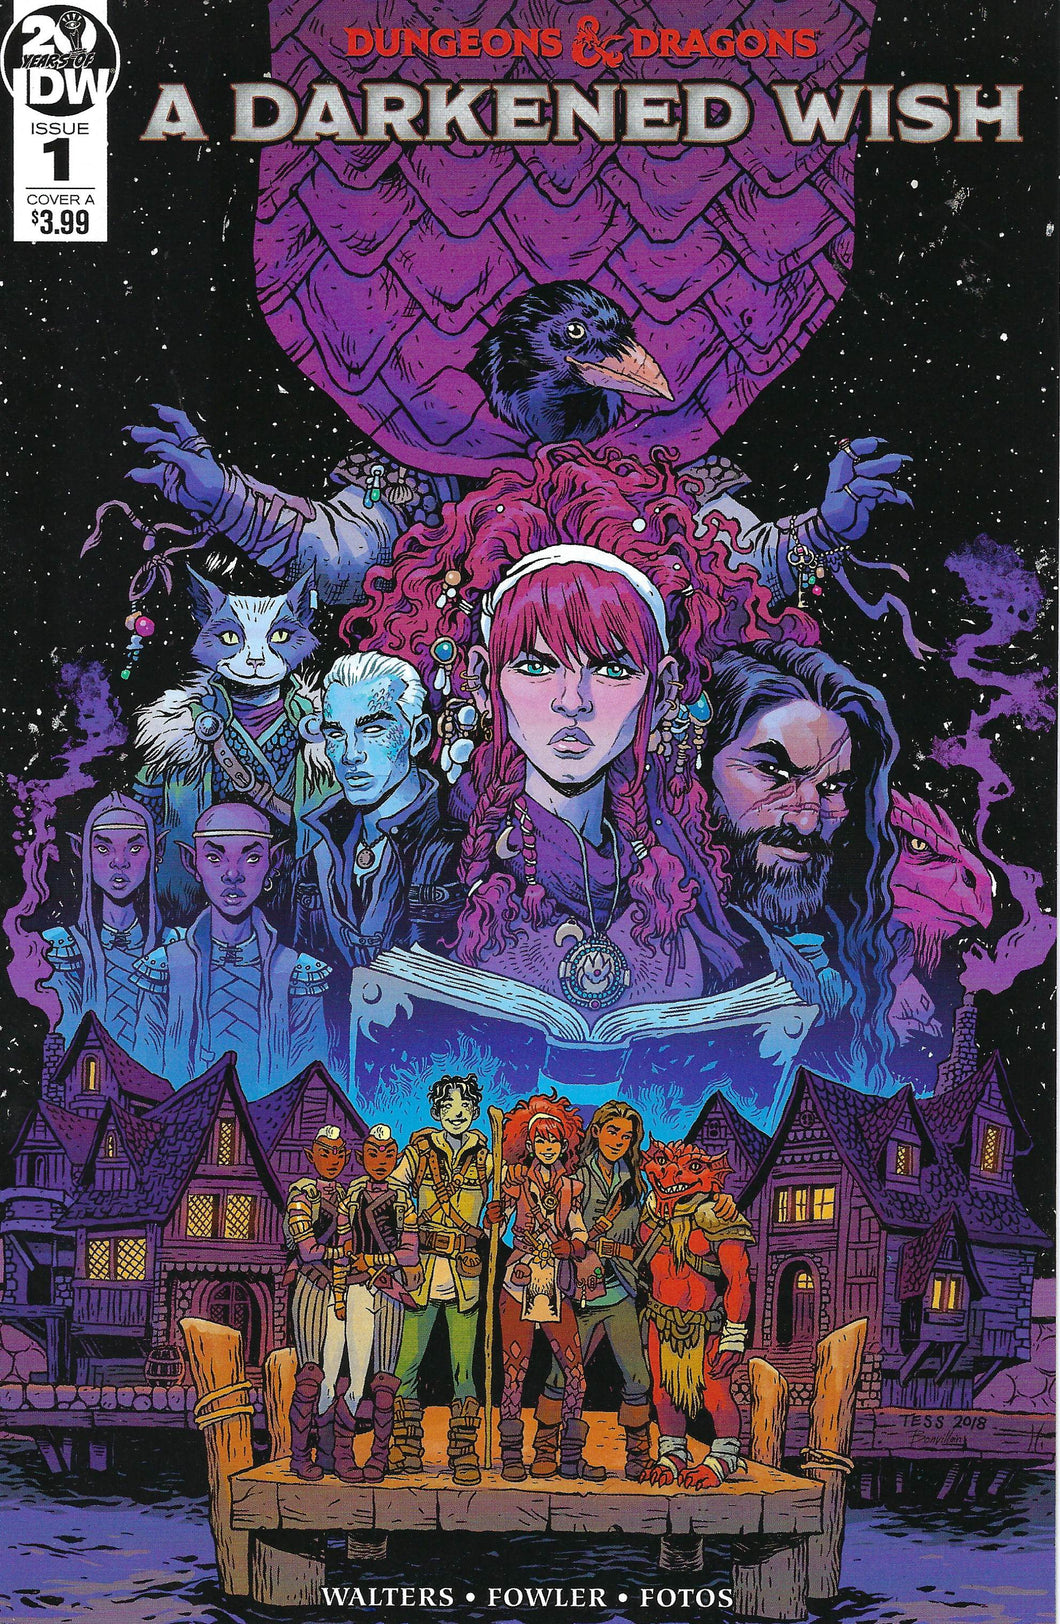 Dungeons & Dragons : A Darkened Wish #1 (2019) Cover A